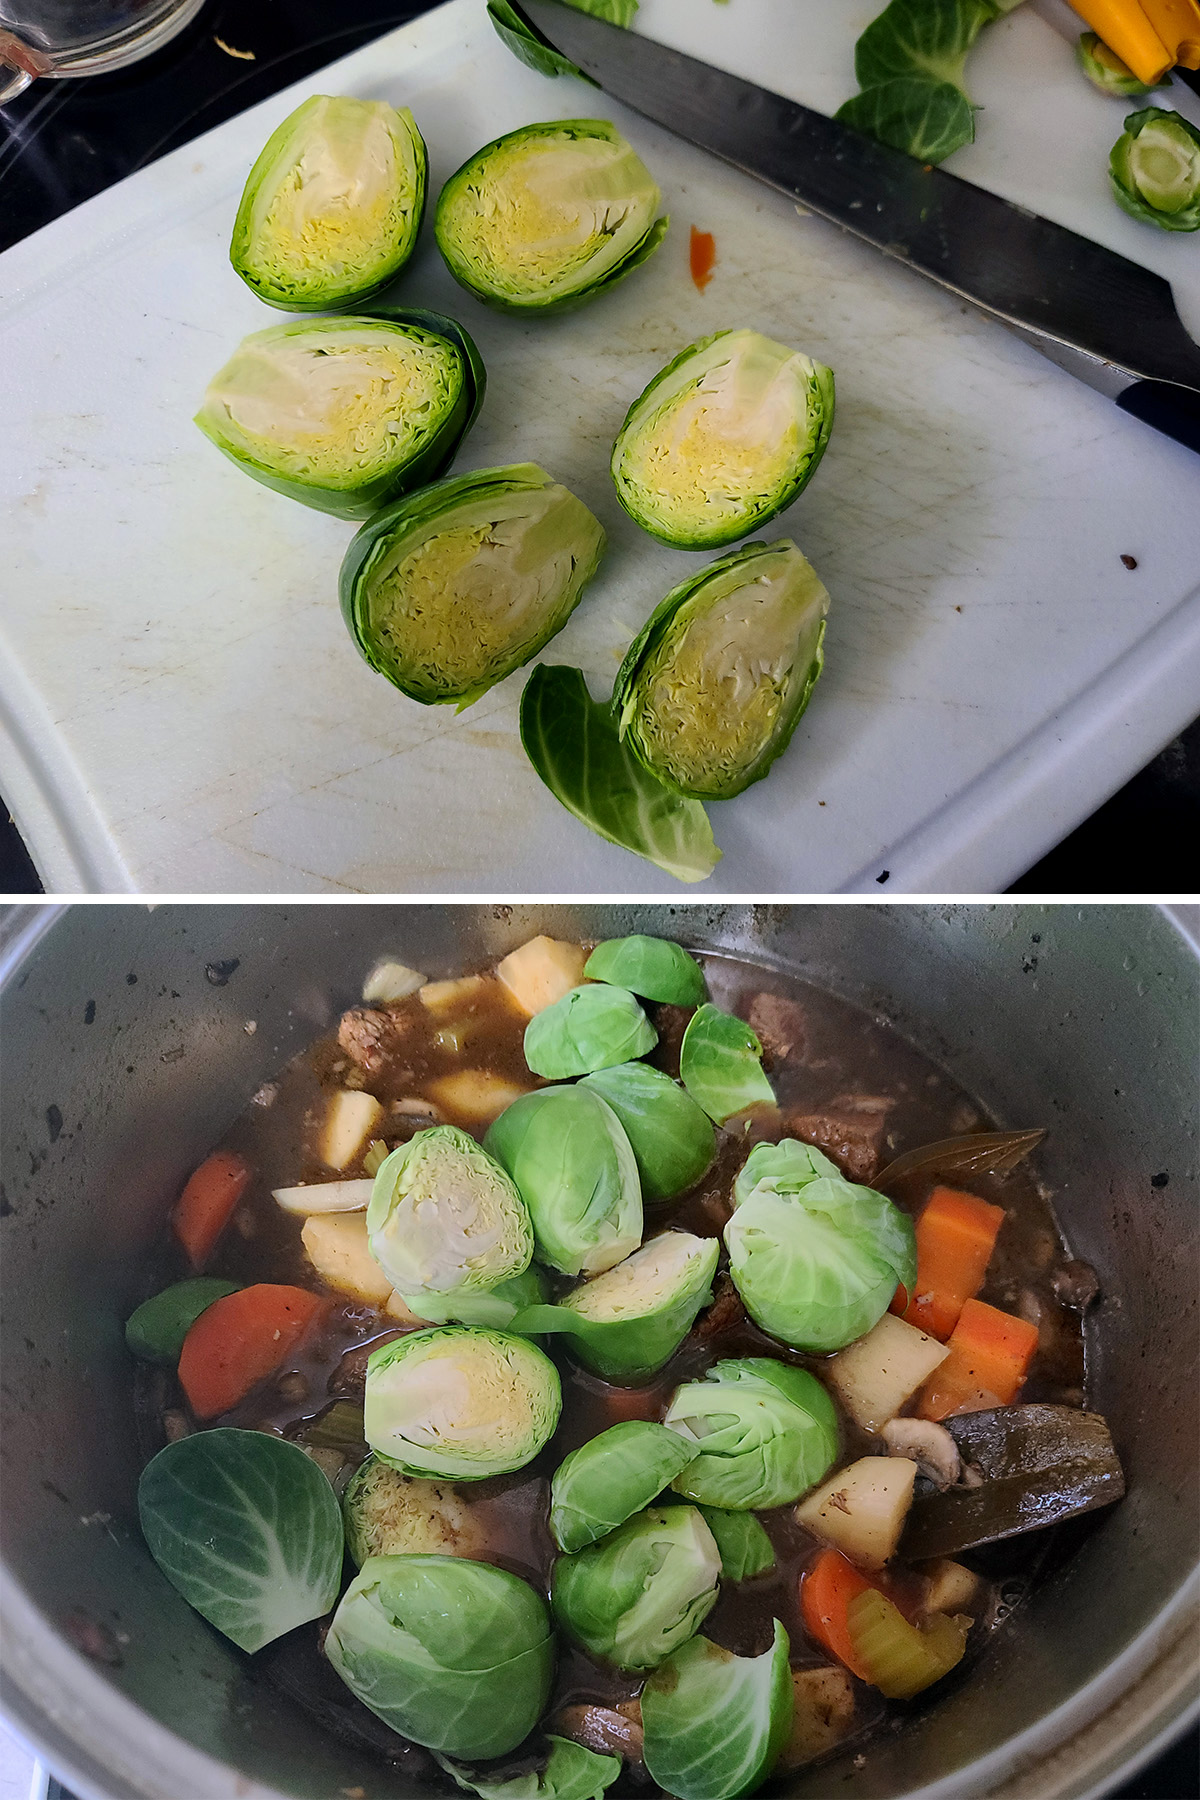 A two part image showing Brussels Sprouts being cut in half and added to the pot.